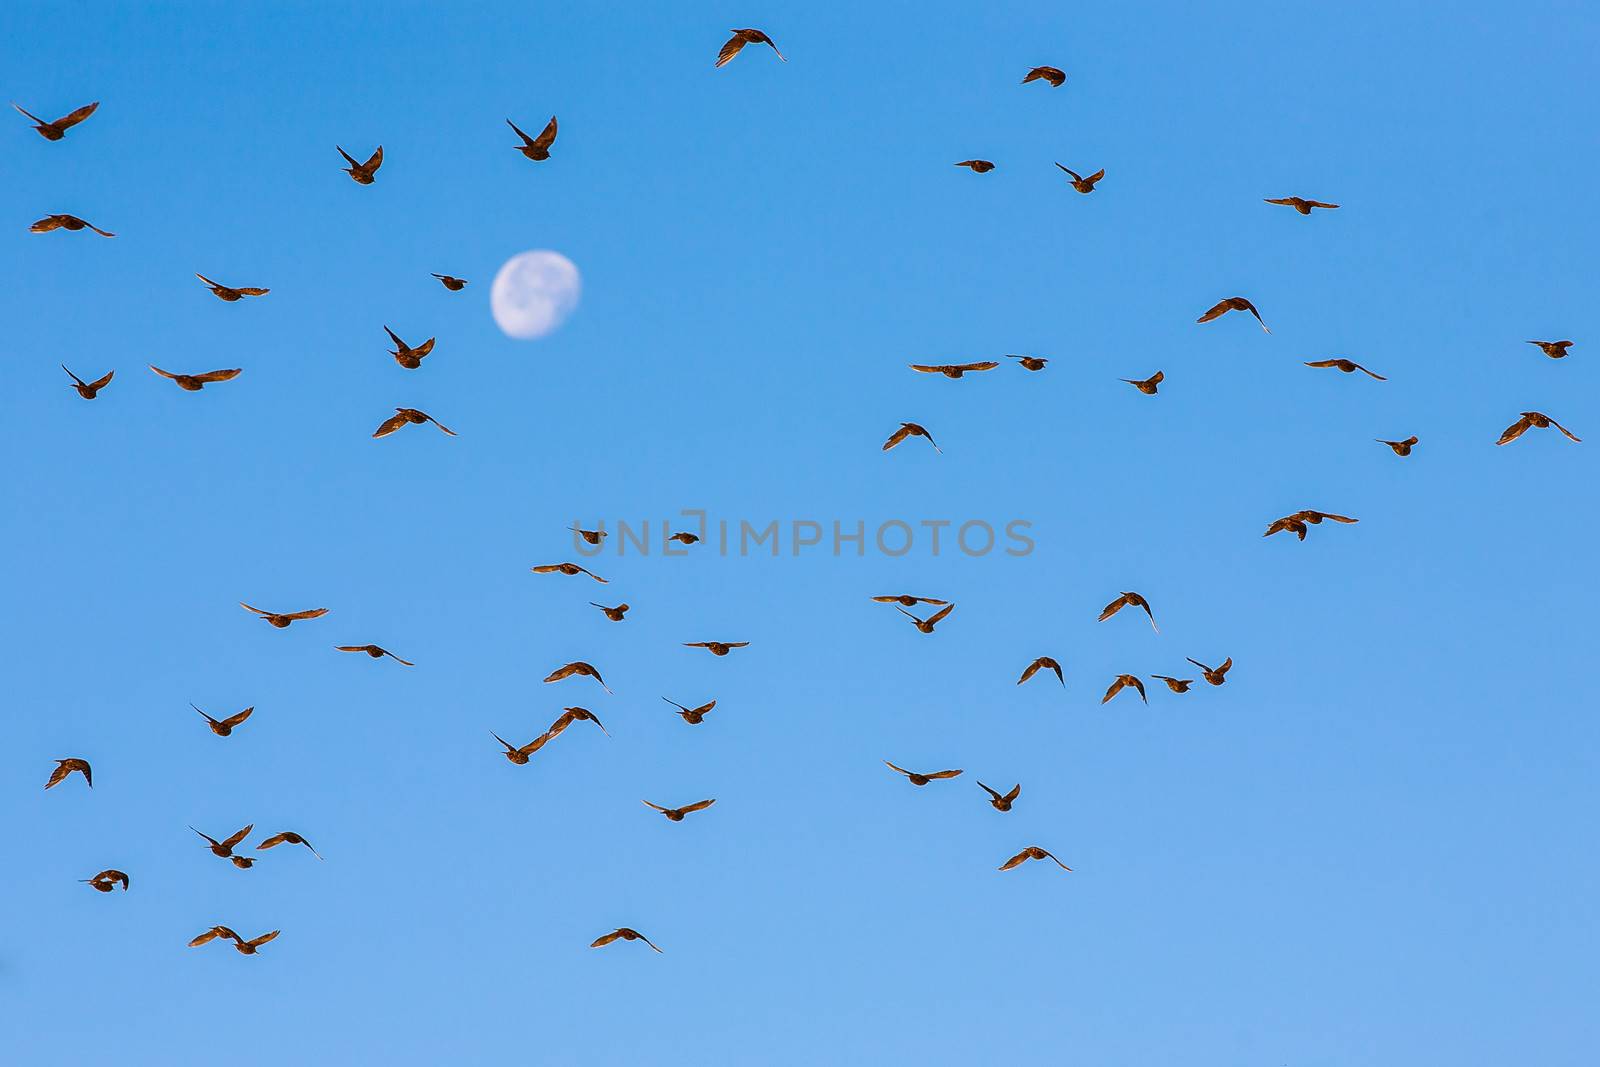 Photo presents flock of several dozen of birds flying in blue sky, moon in background.